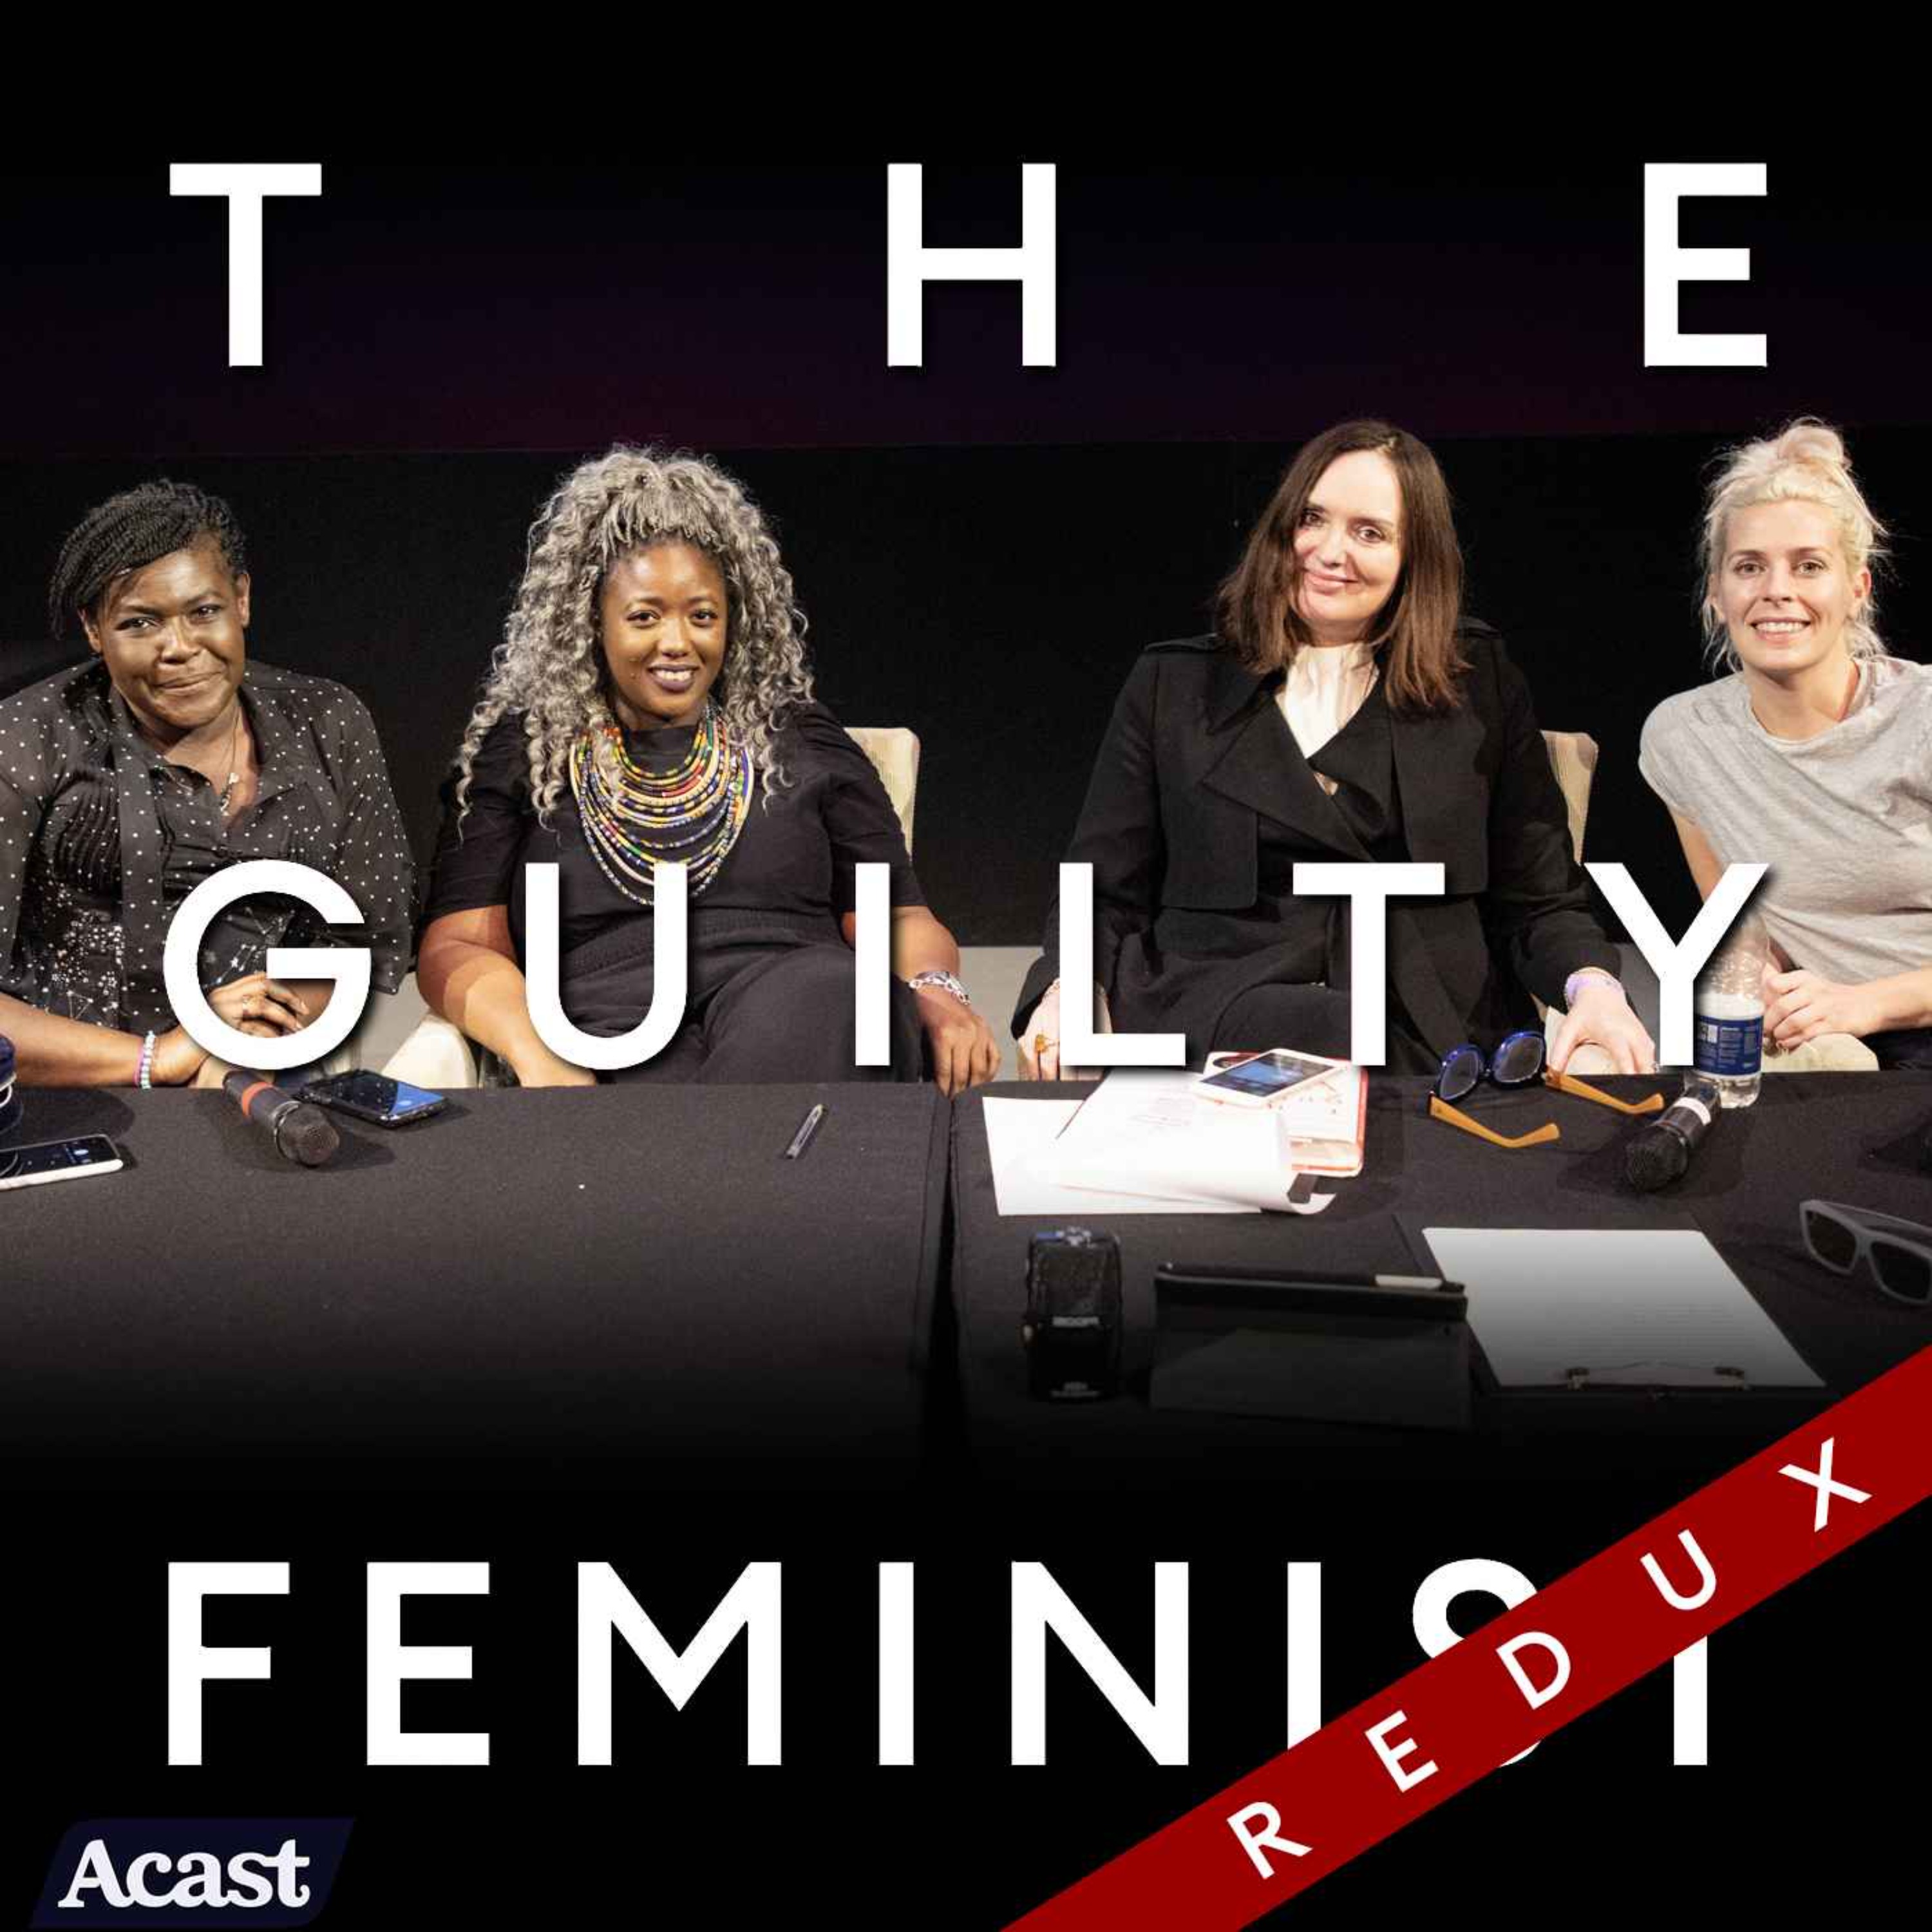 The Guilty Feminist Redux: Women in Science with Sara Pascoe and special guests Dr Maggie Aderin-Pocock and Dr Anne-Marie Imafidon